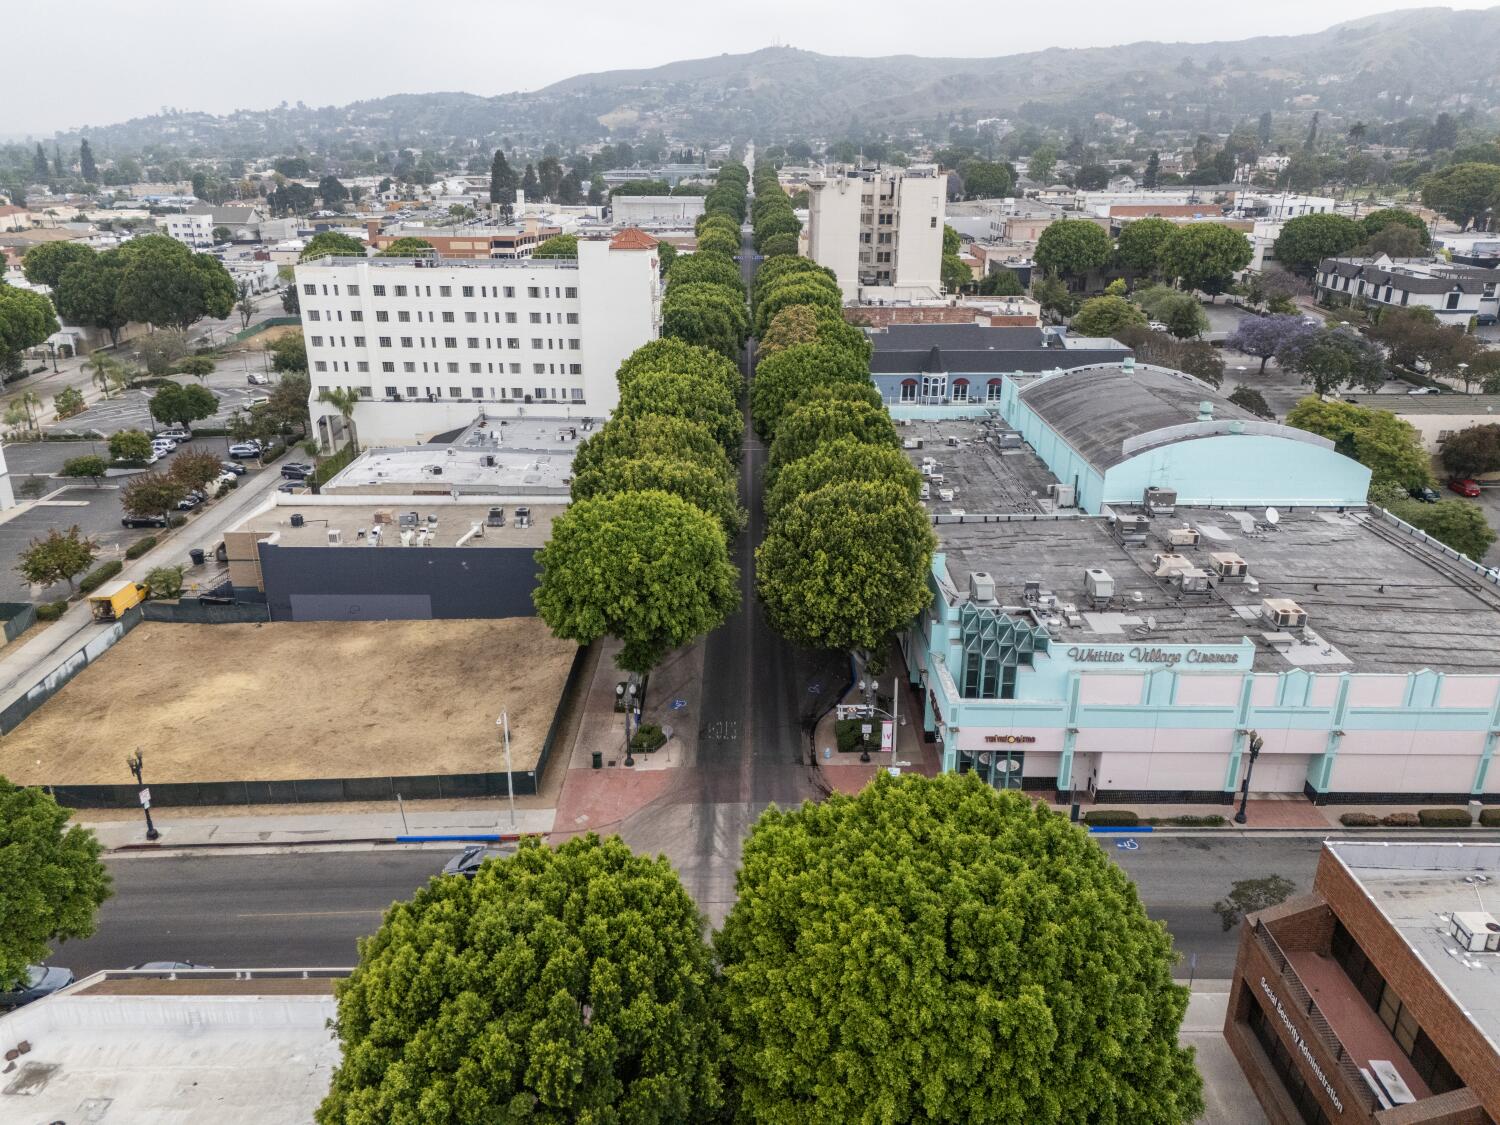 Whittier to remove more than 80 ficus trees in bid to boost business